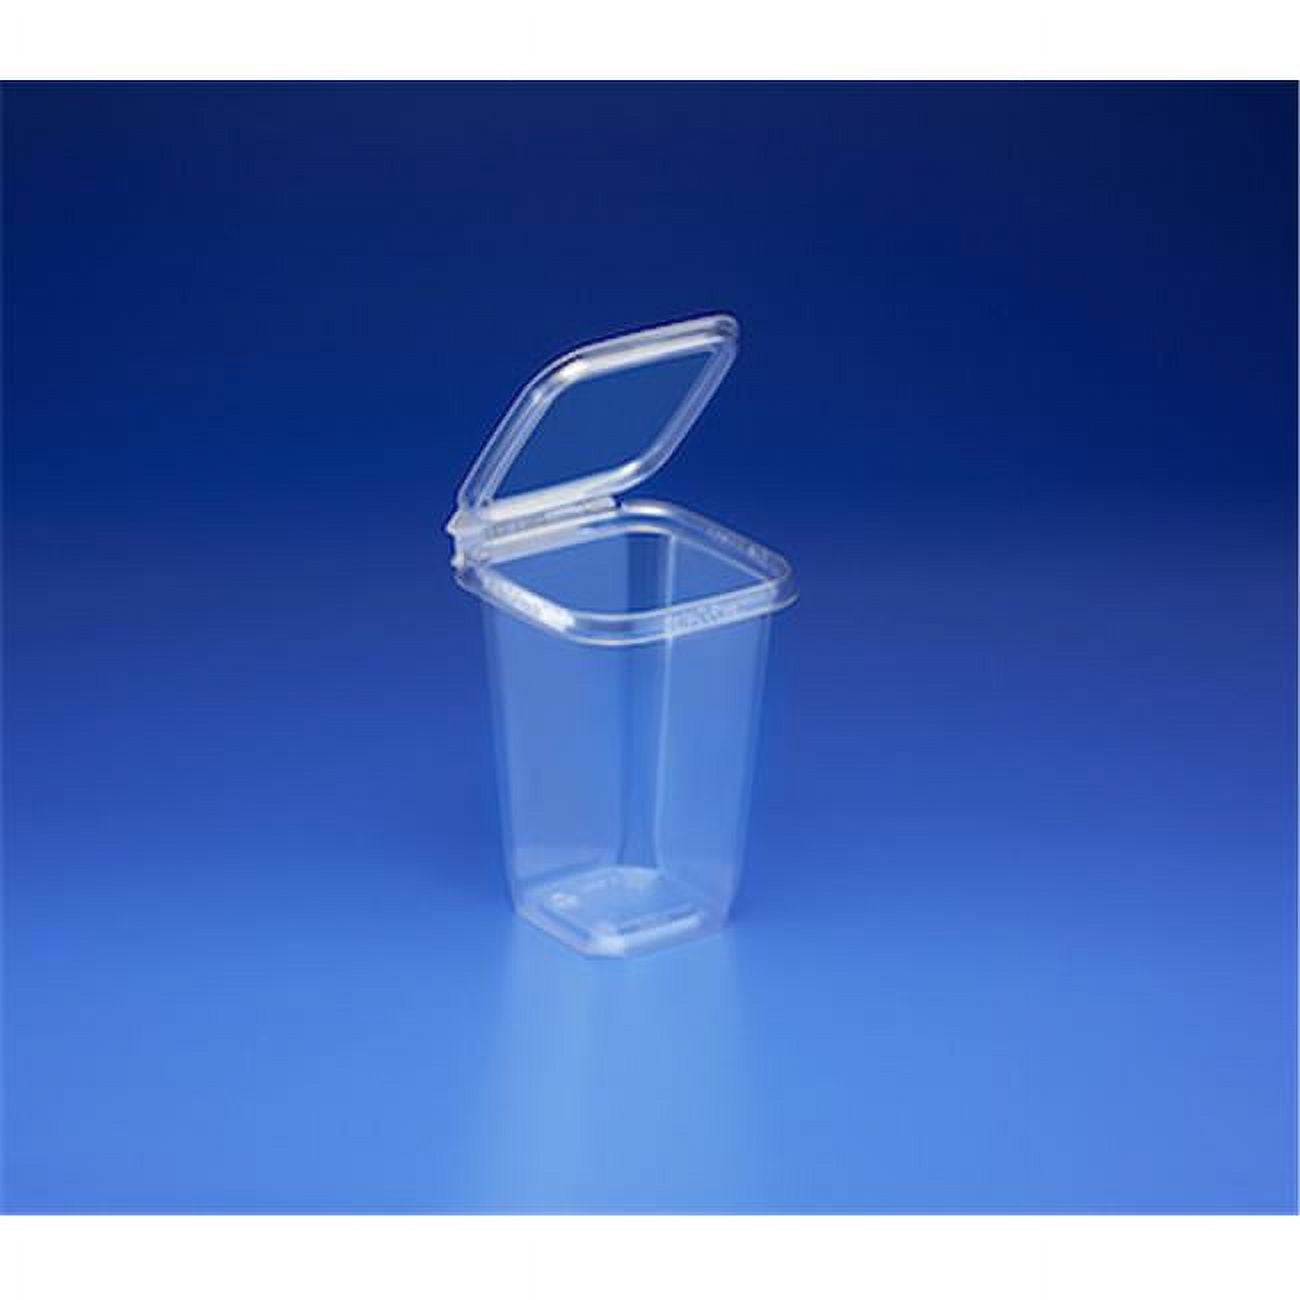 Ts4032 32 Oz Squareware Clamshell Pete Tamper Resistant, Clear - Case Of 240